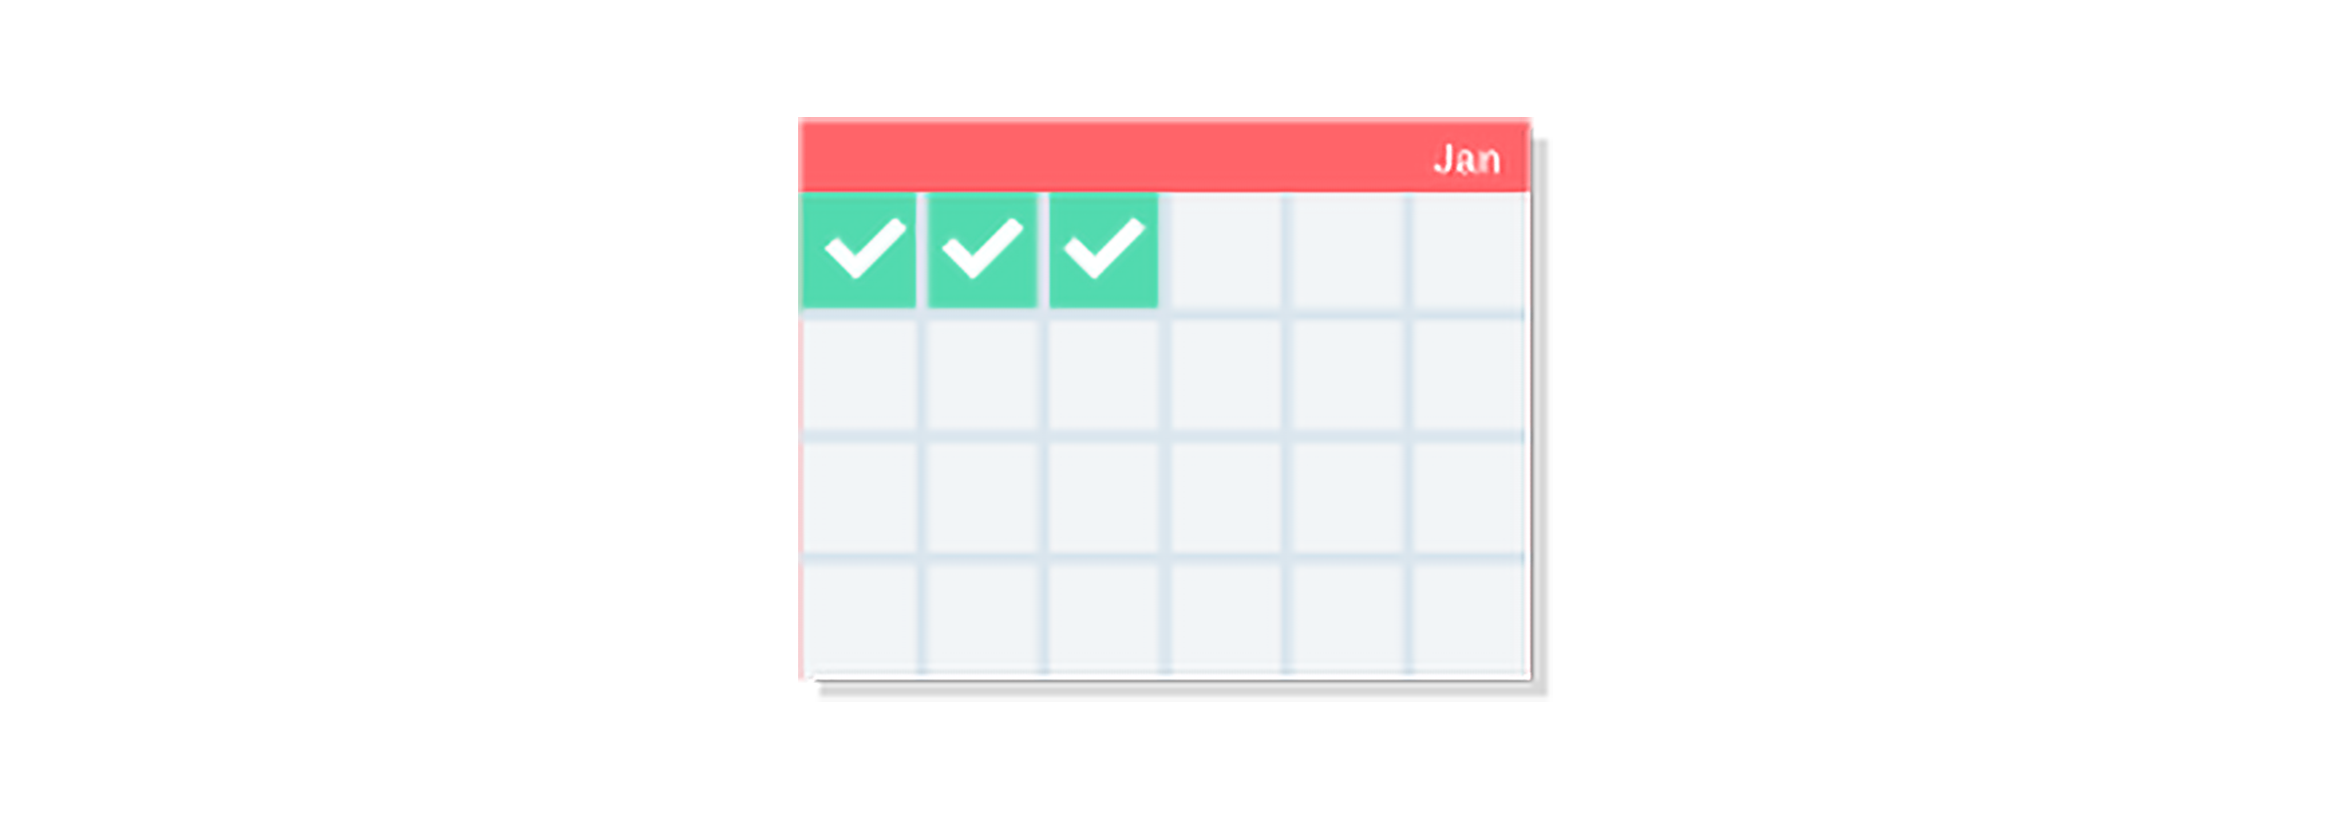 A calendar with green ticks marked on the first three days of January.